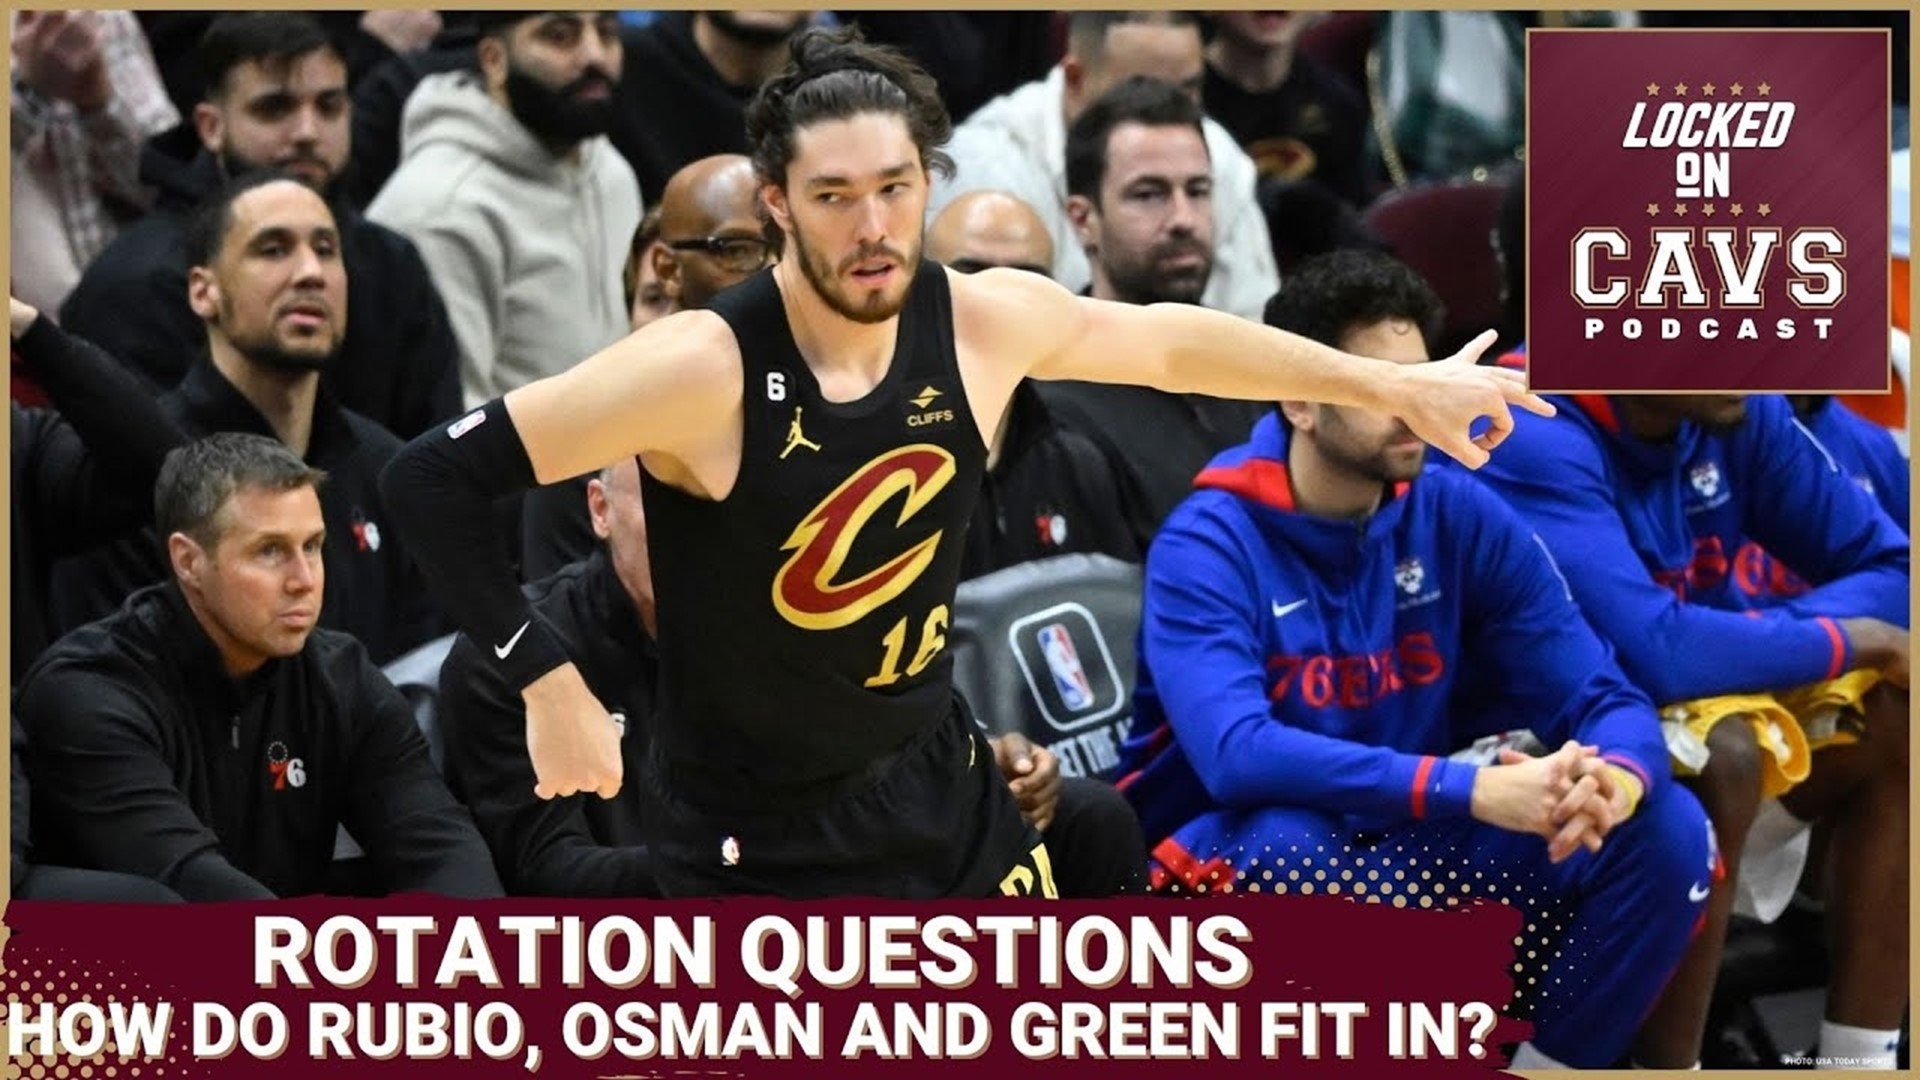 Hosts Wolf Manning and Evan Dammarell talk about Ricky Rubio and Cedi Osman’s minutes right now and possible roles in the future.